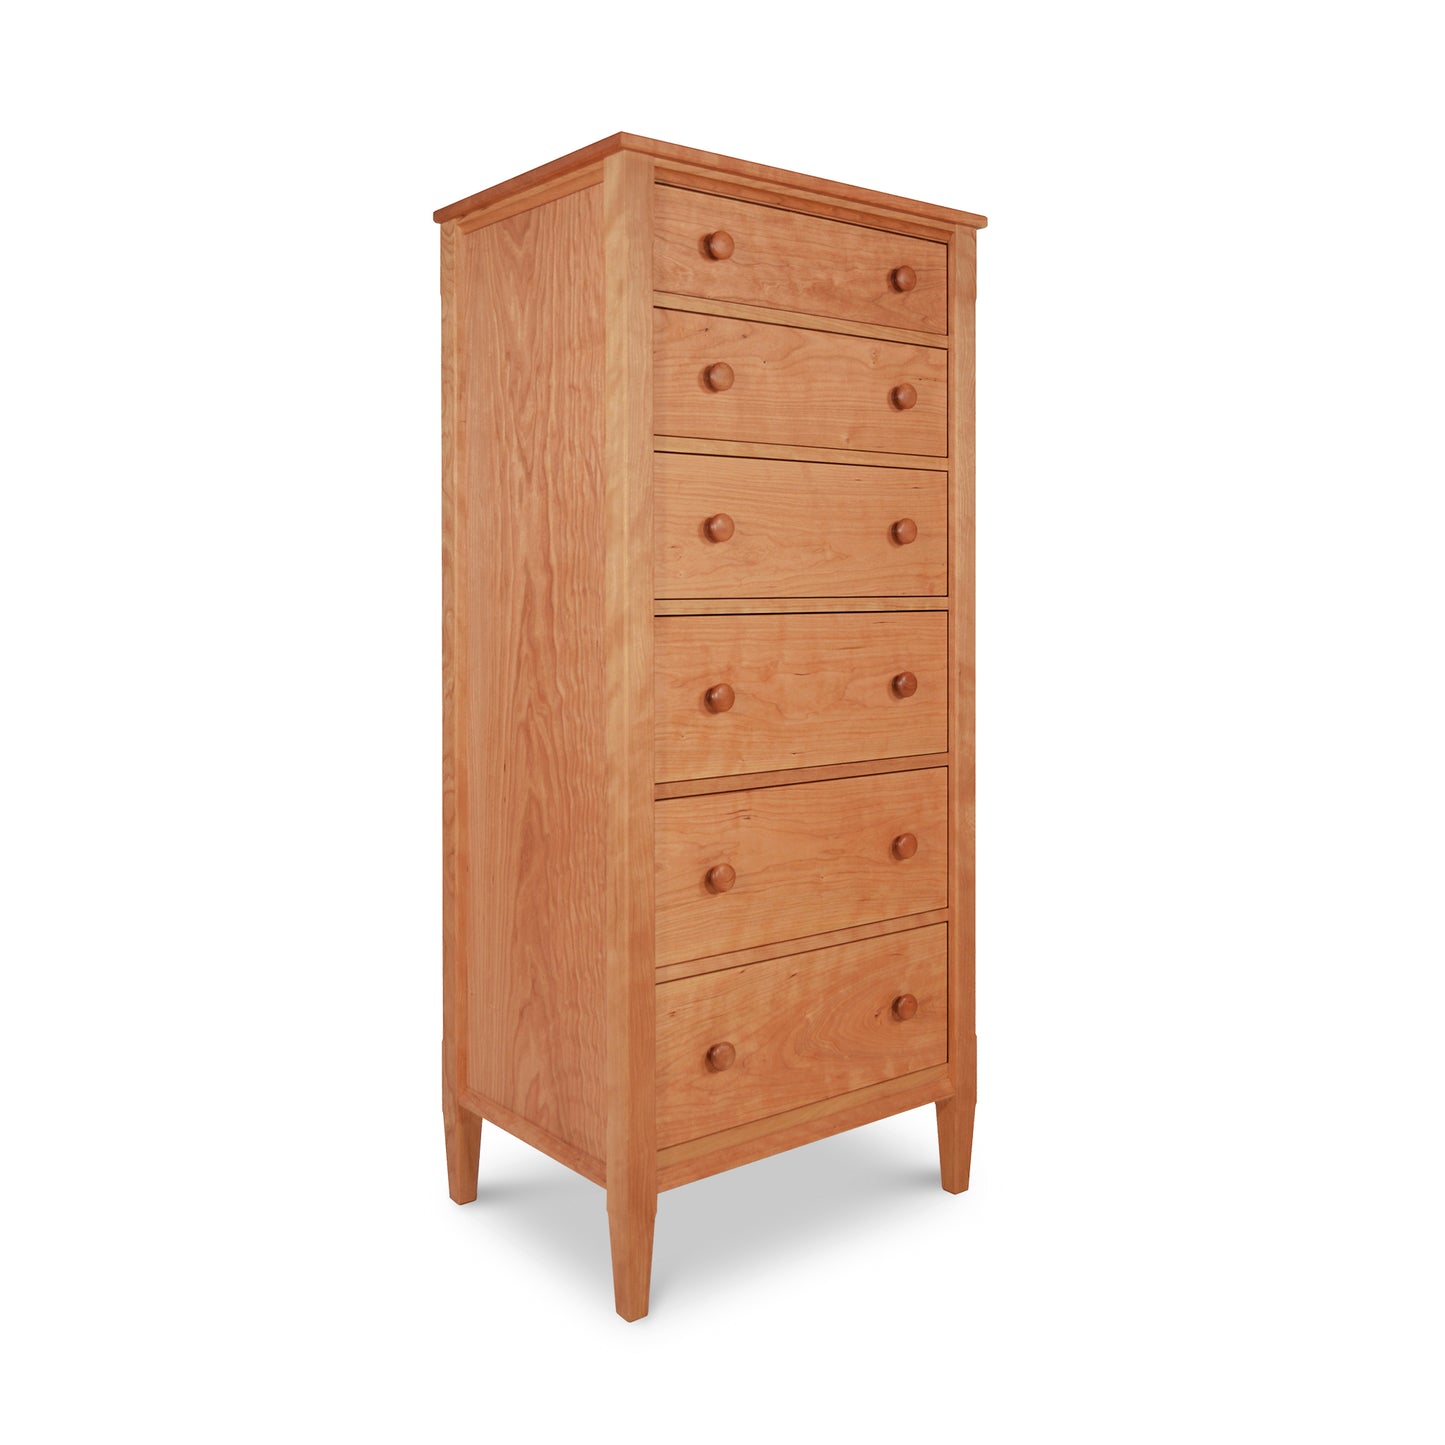 A Vermont Shaker Lingerie Chest from the Maple Corner Woodworks, on a white background.